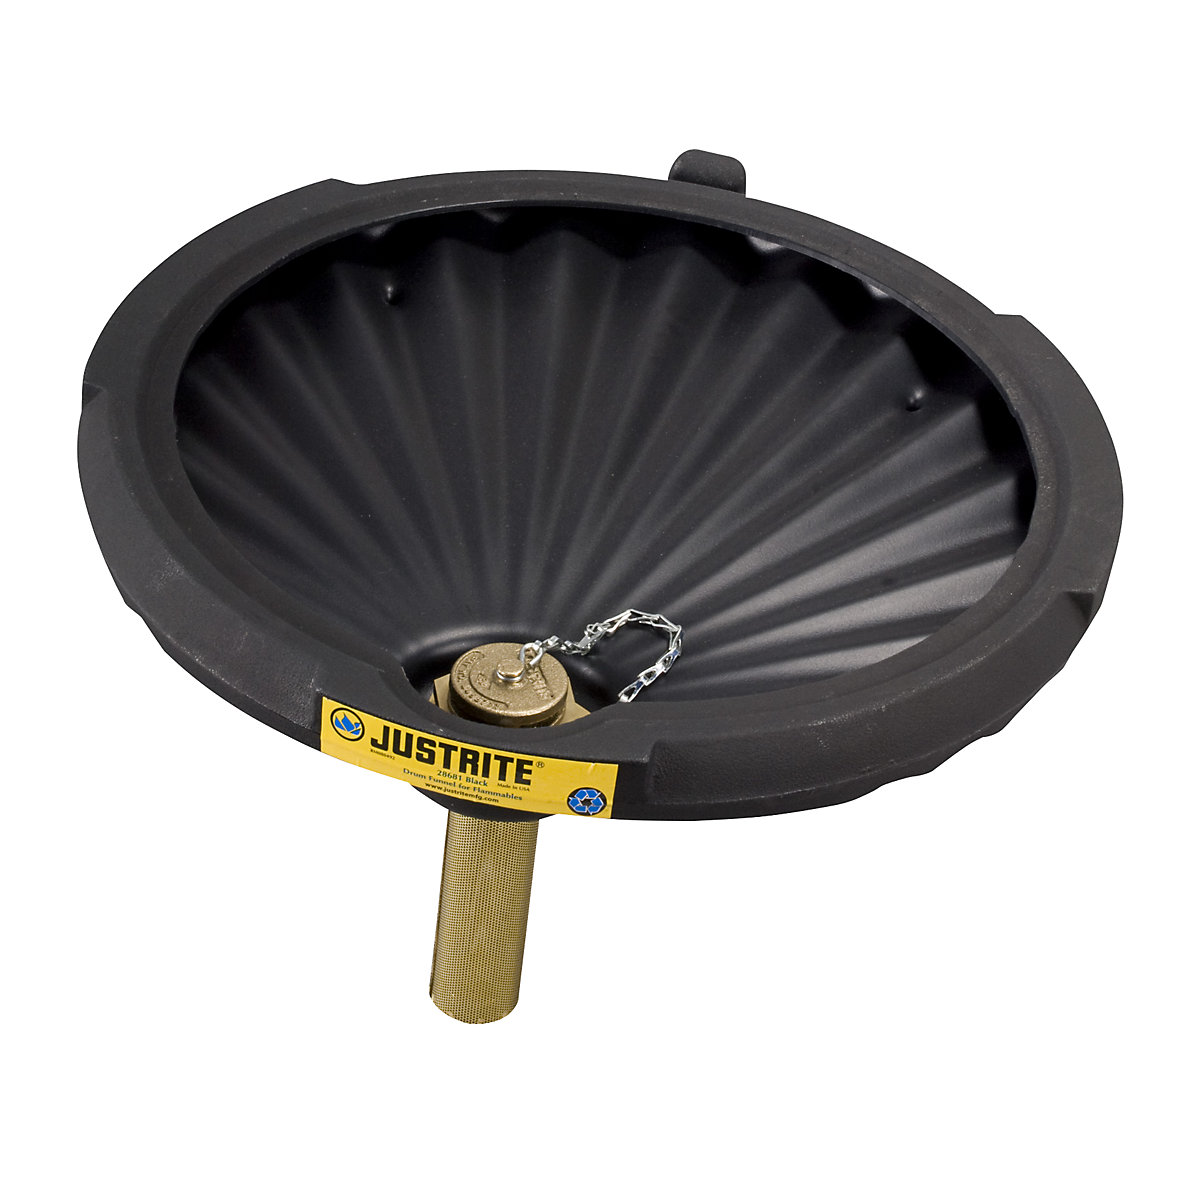 Justrite – PE drum funnel, for flammable liquids, with flame trap